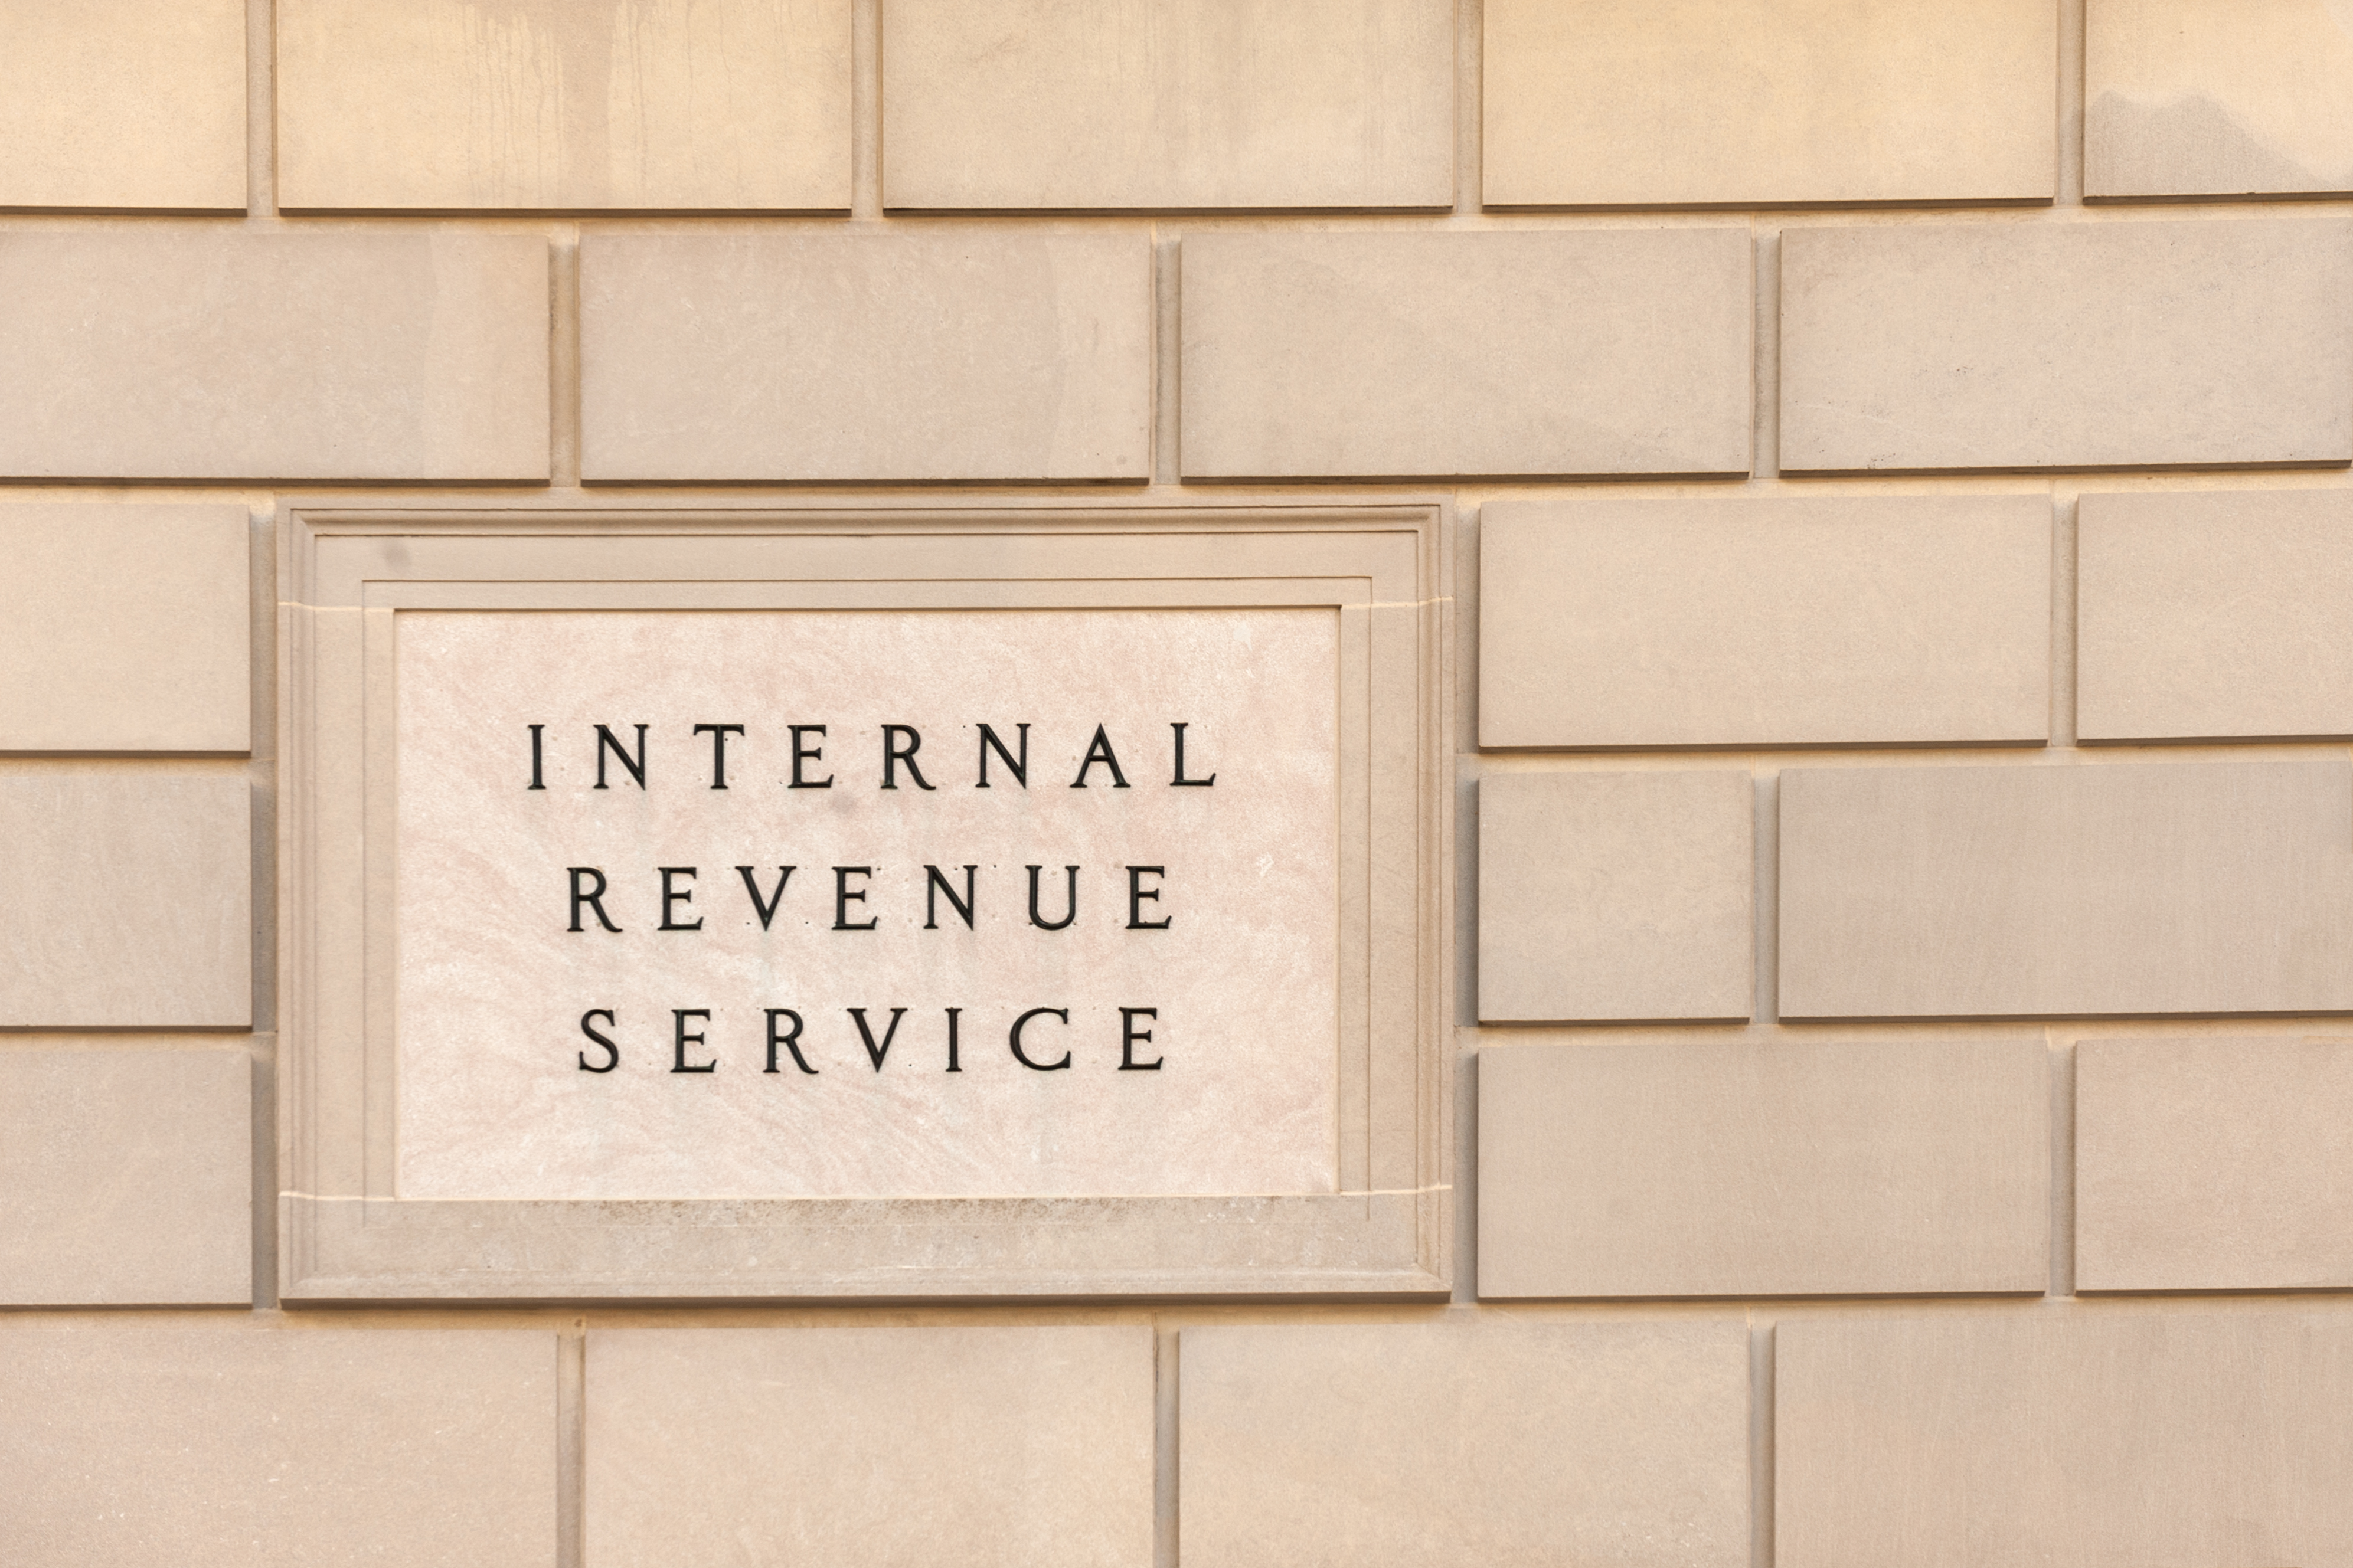 Image of a brick wall with "Internal Revenue Service" engraved